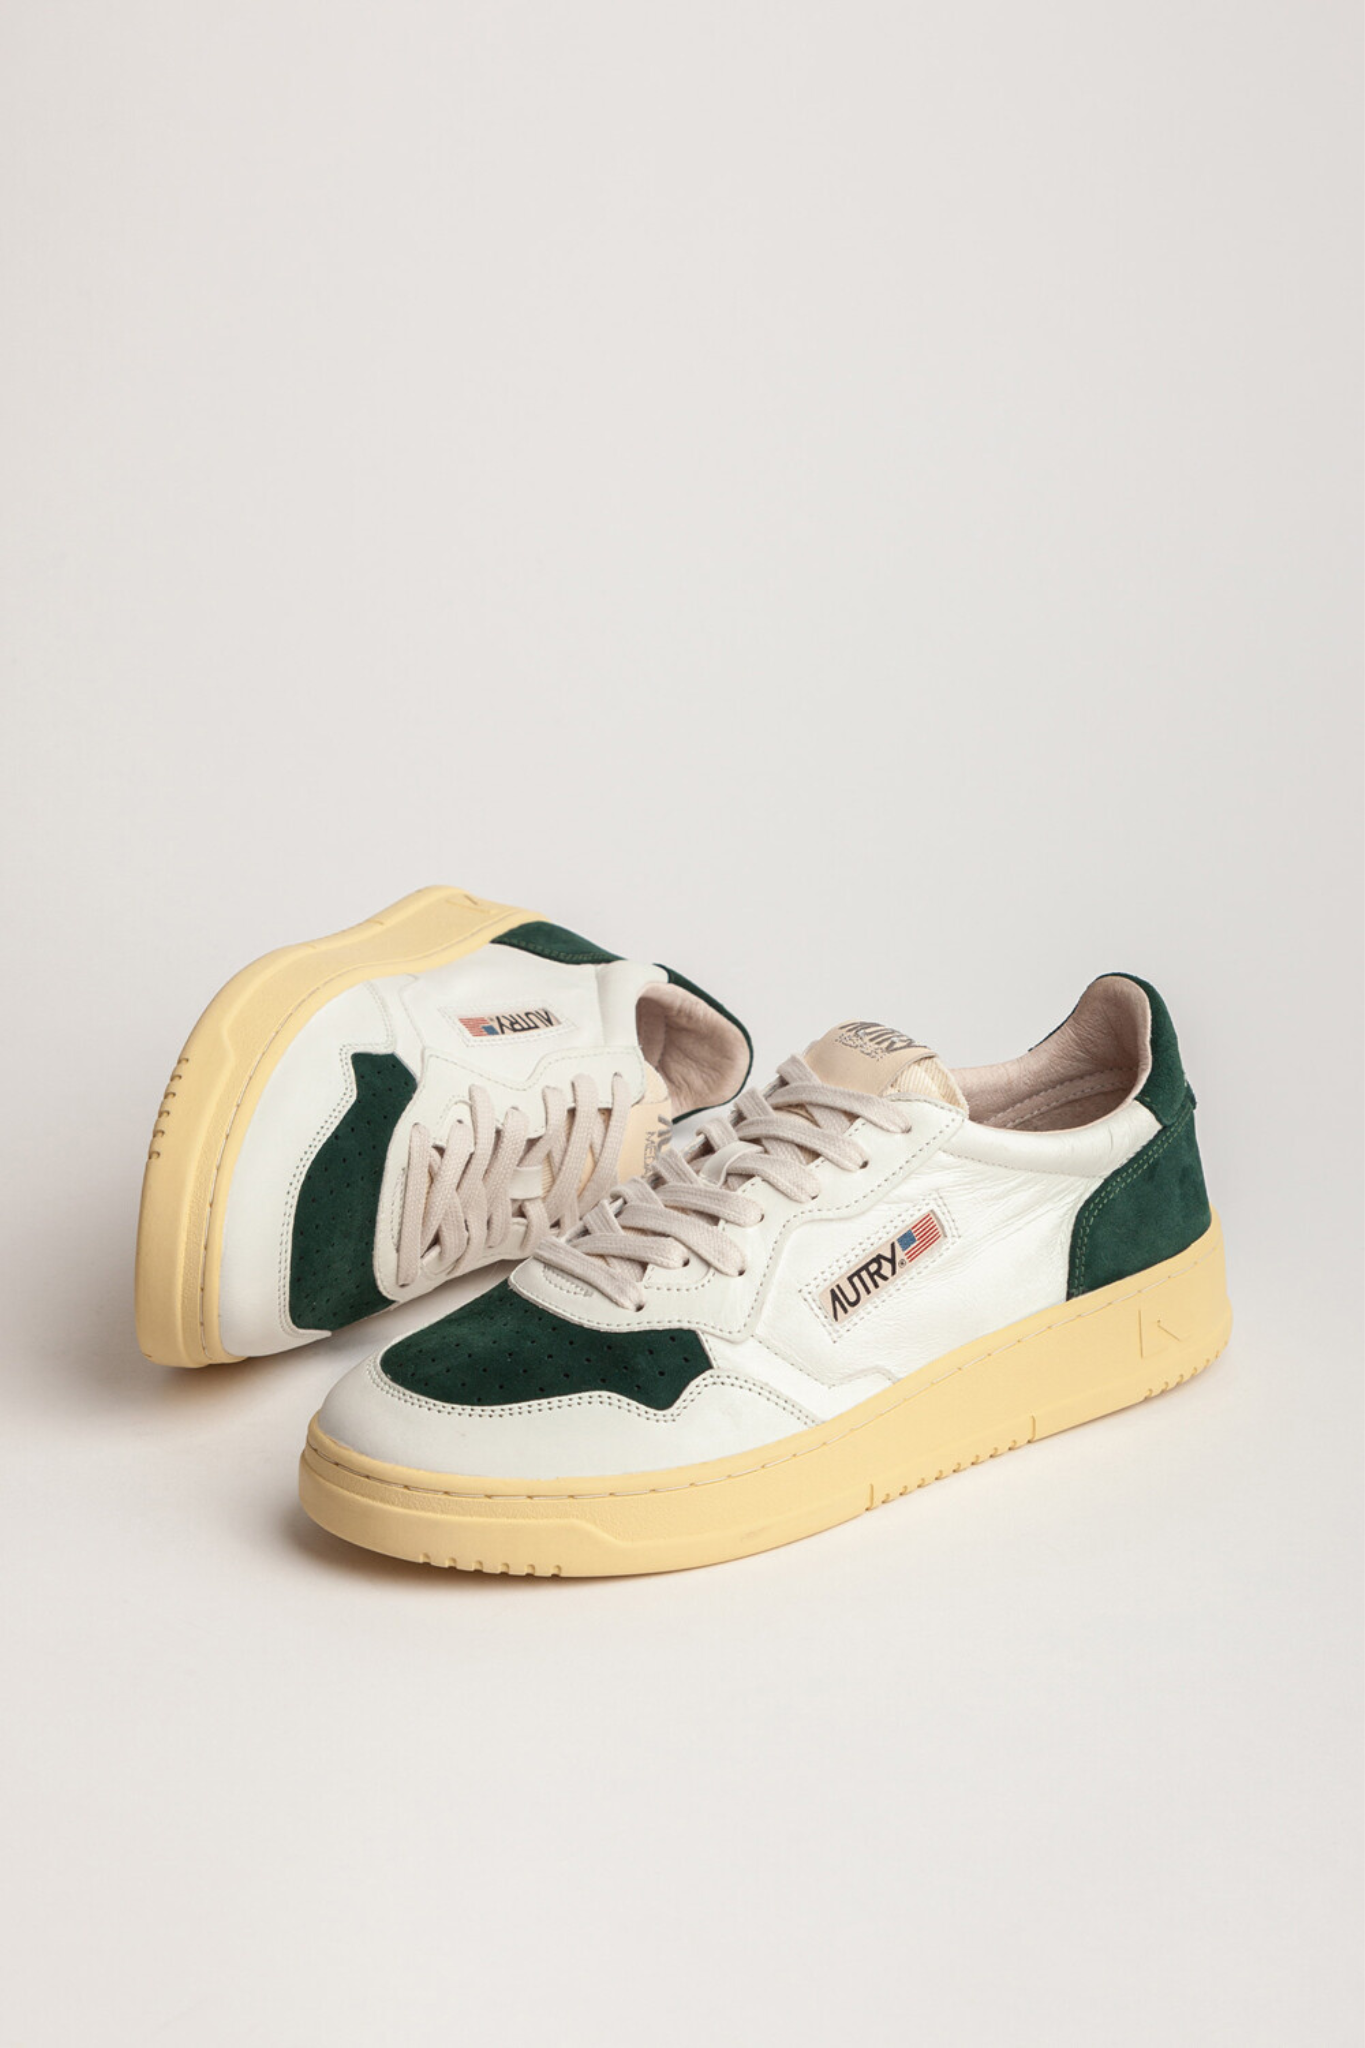 AULW-SL09 - MEDALIST LOW  SNEAKERS IN WHITE LEATHER AND BOTTLE